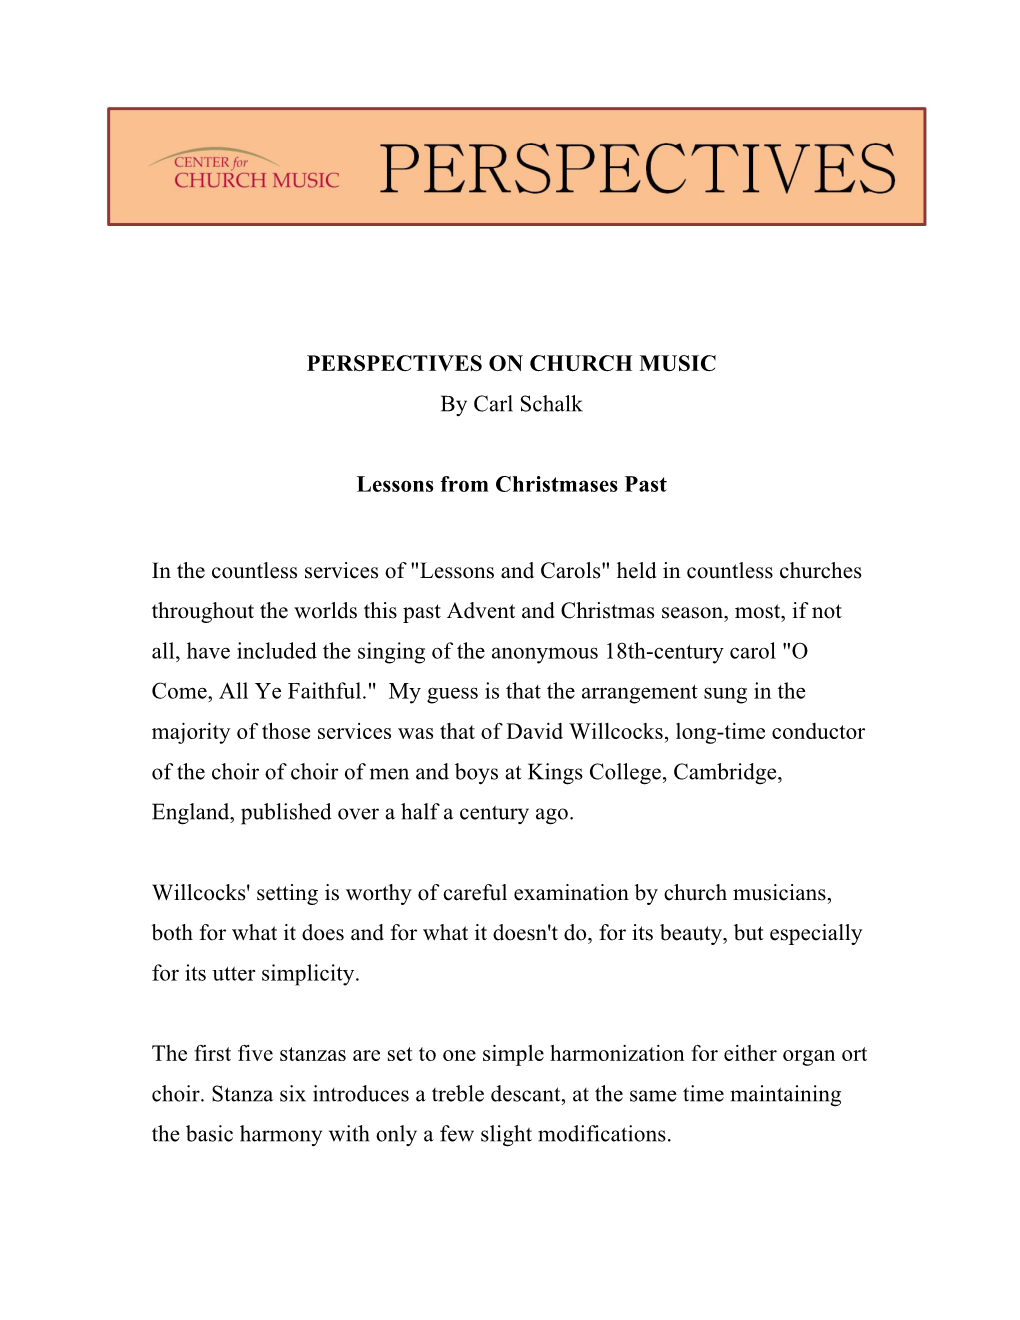 Perspectives on Church Music #5